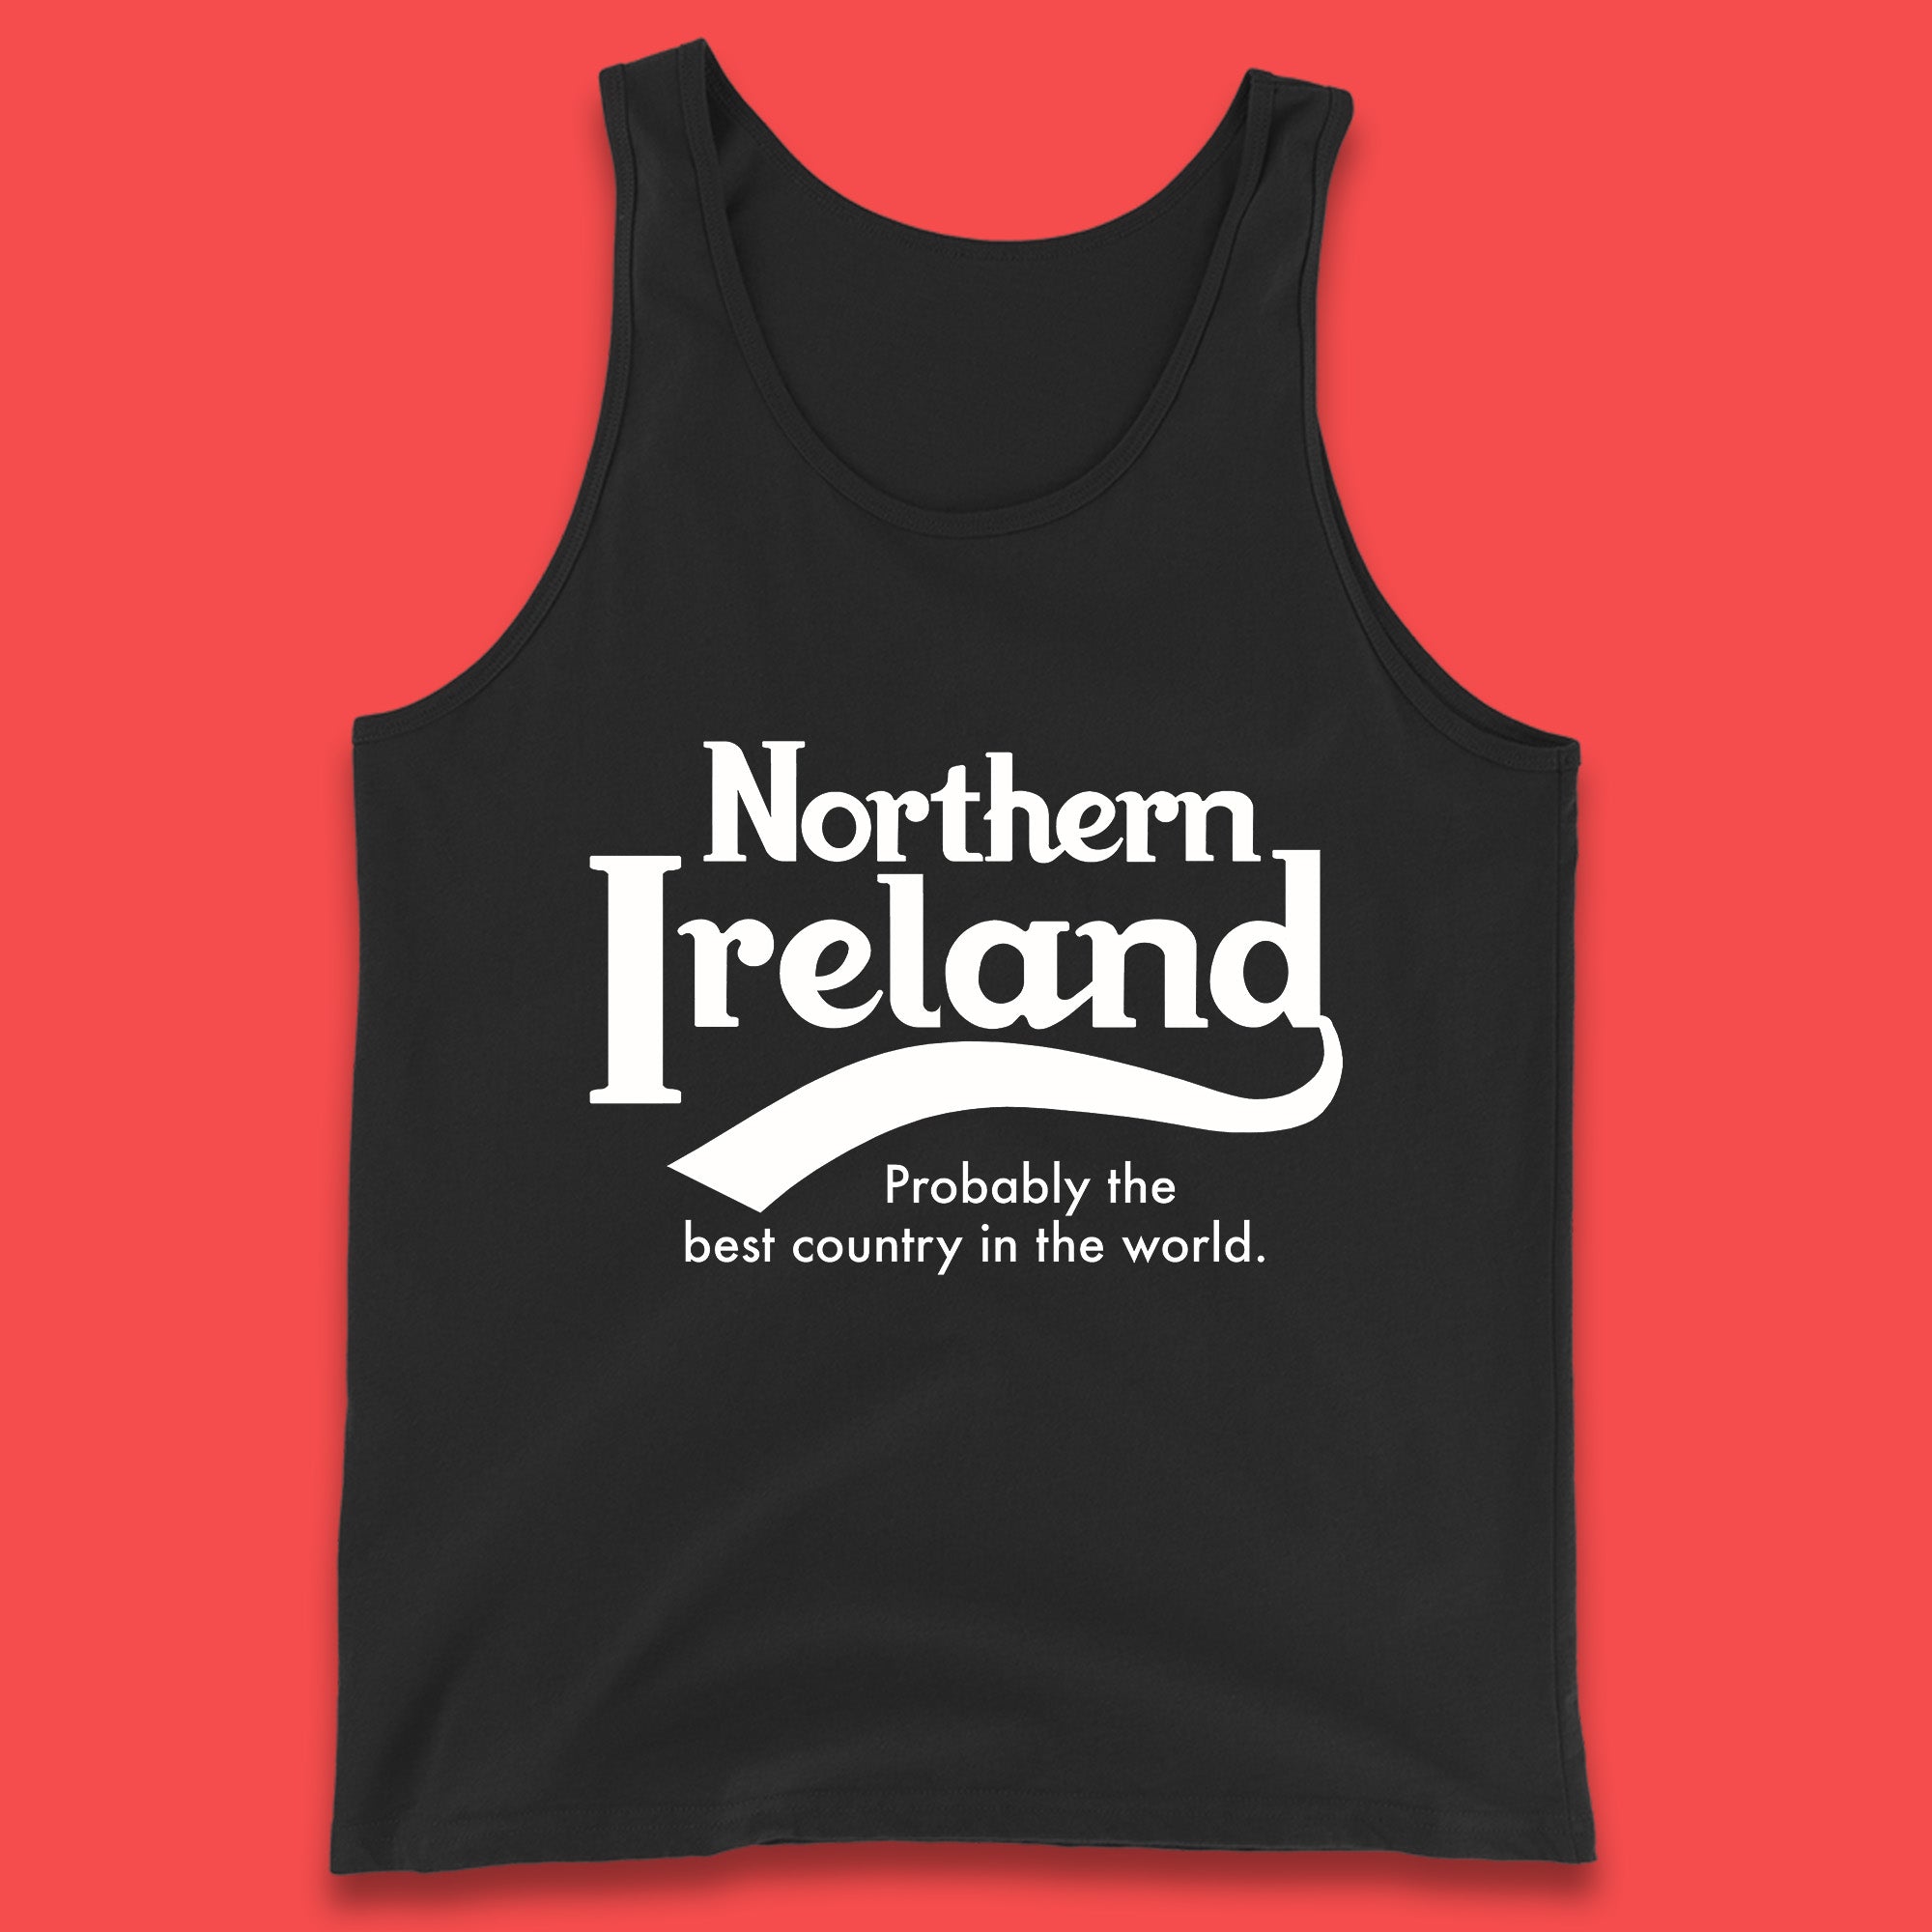 North Ireland Probably The Best Country In The World Uk Constituent Country Northern Ireland Is A Part Of The United Kingdom Tank Top